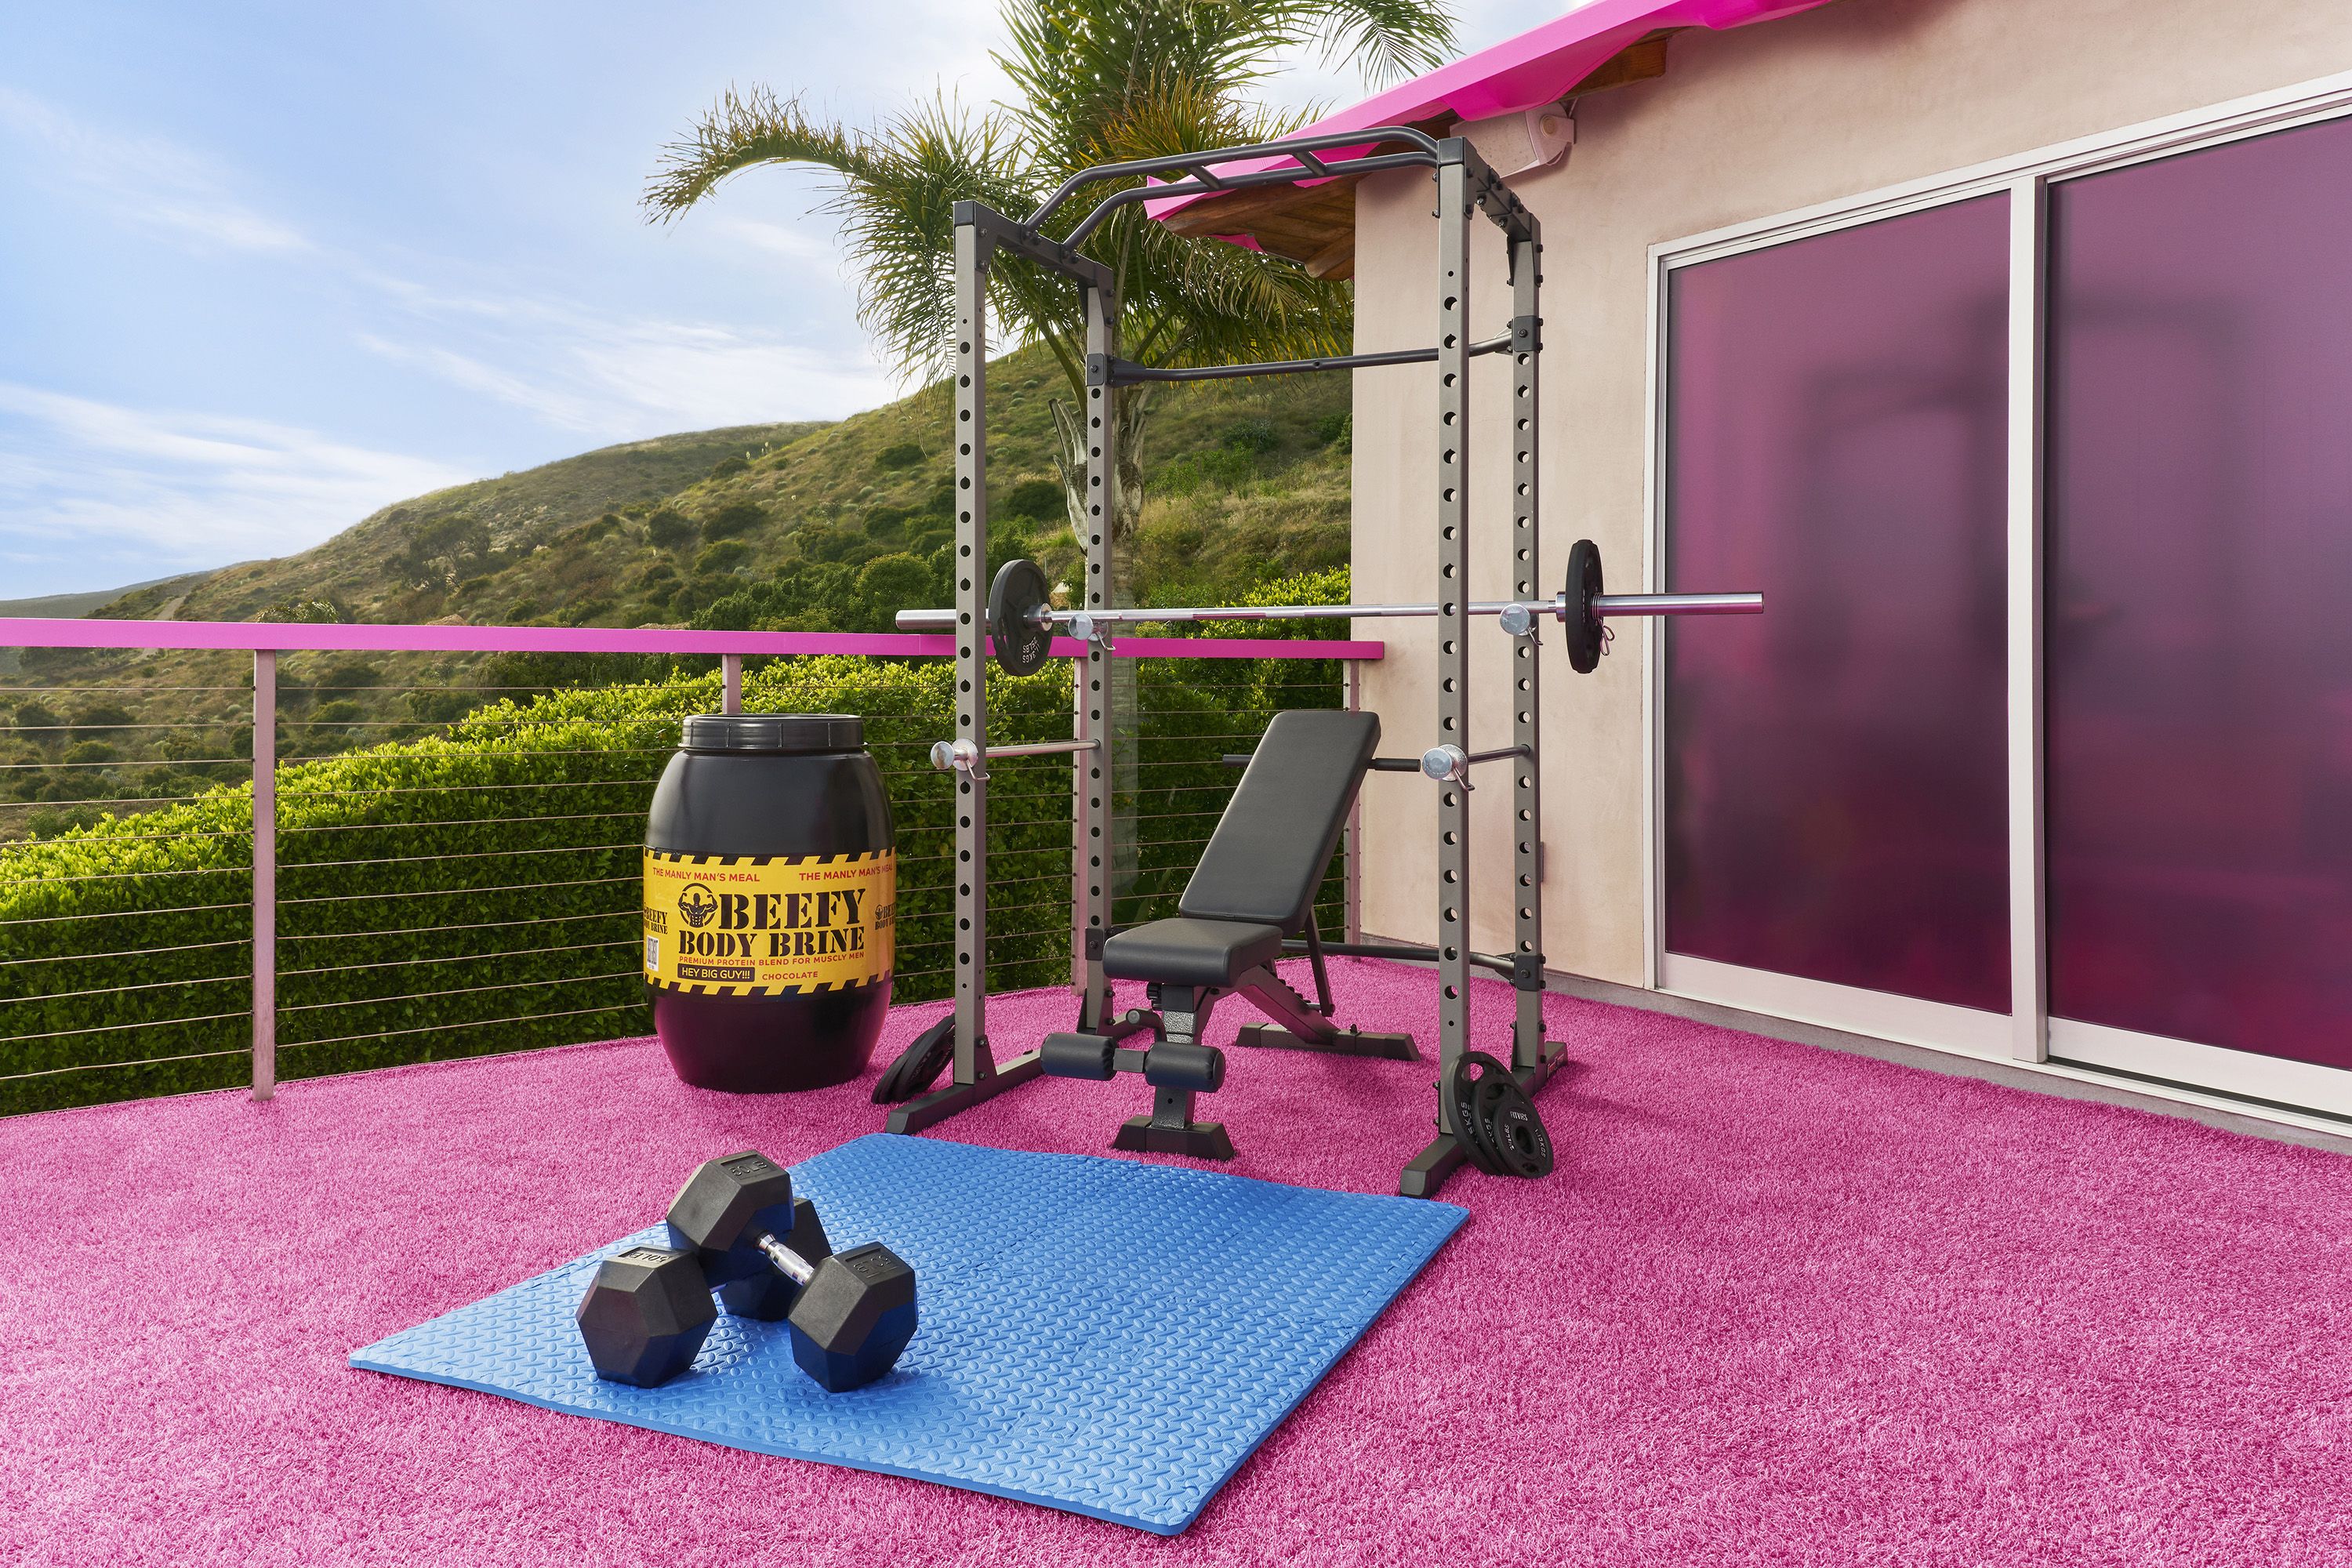 Get Fit at Home with These Inspiring Gym Ideas